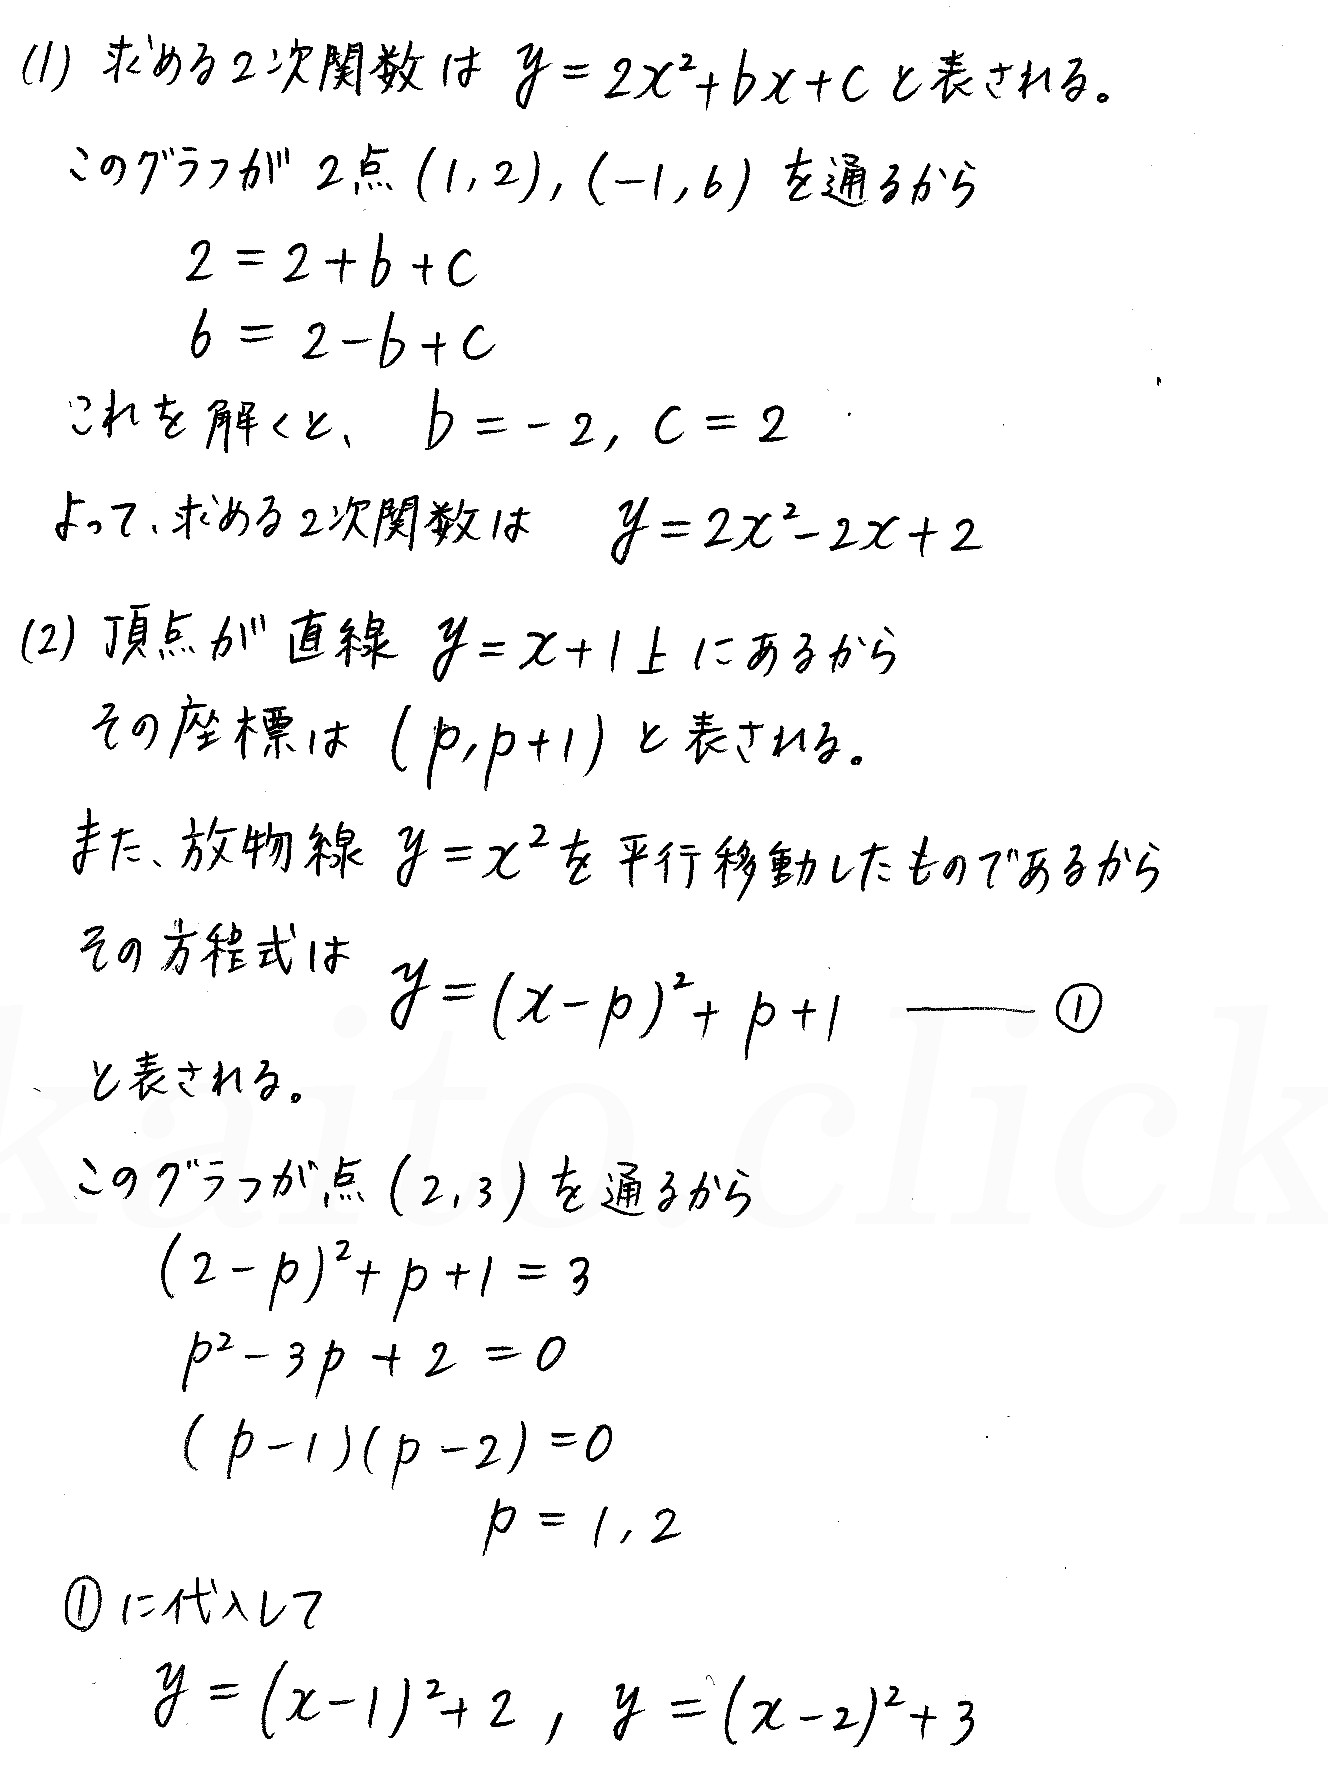 clear数学Ⅰ-215解答 